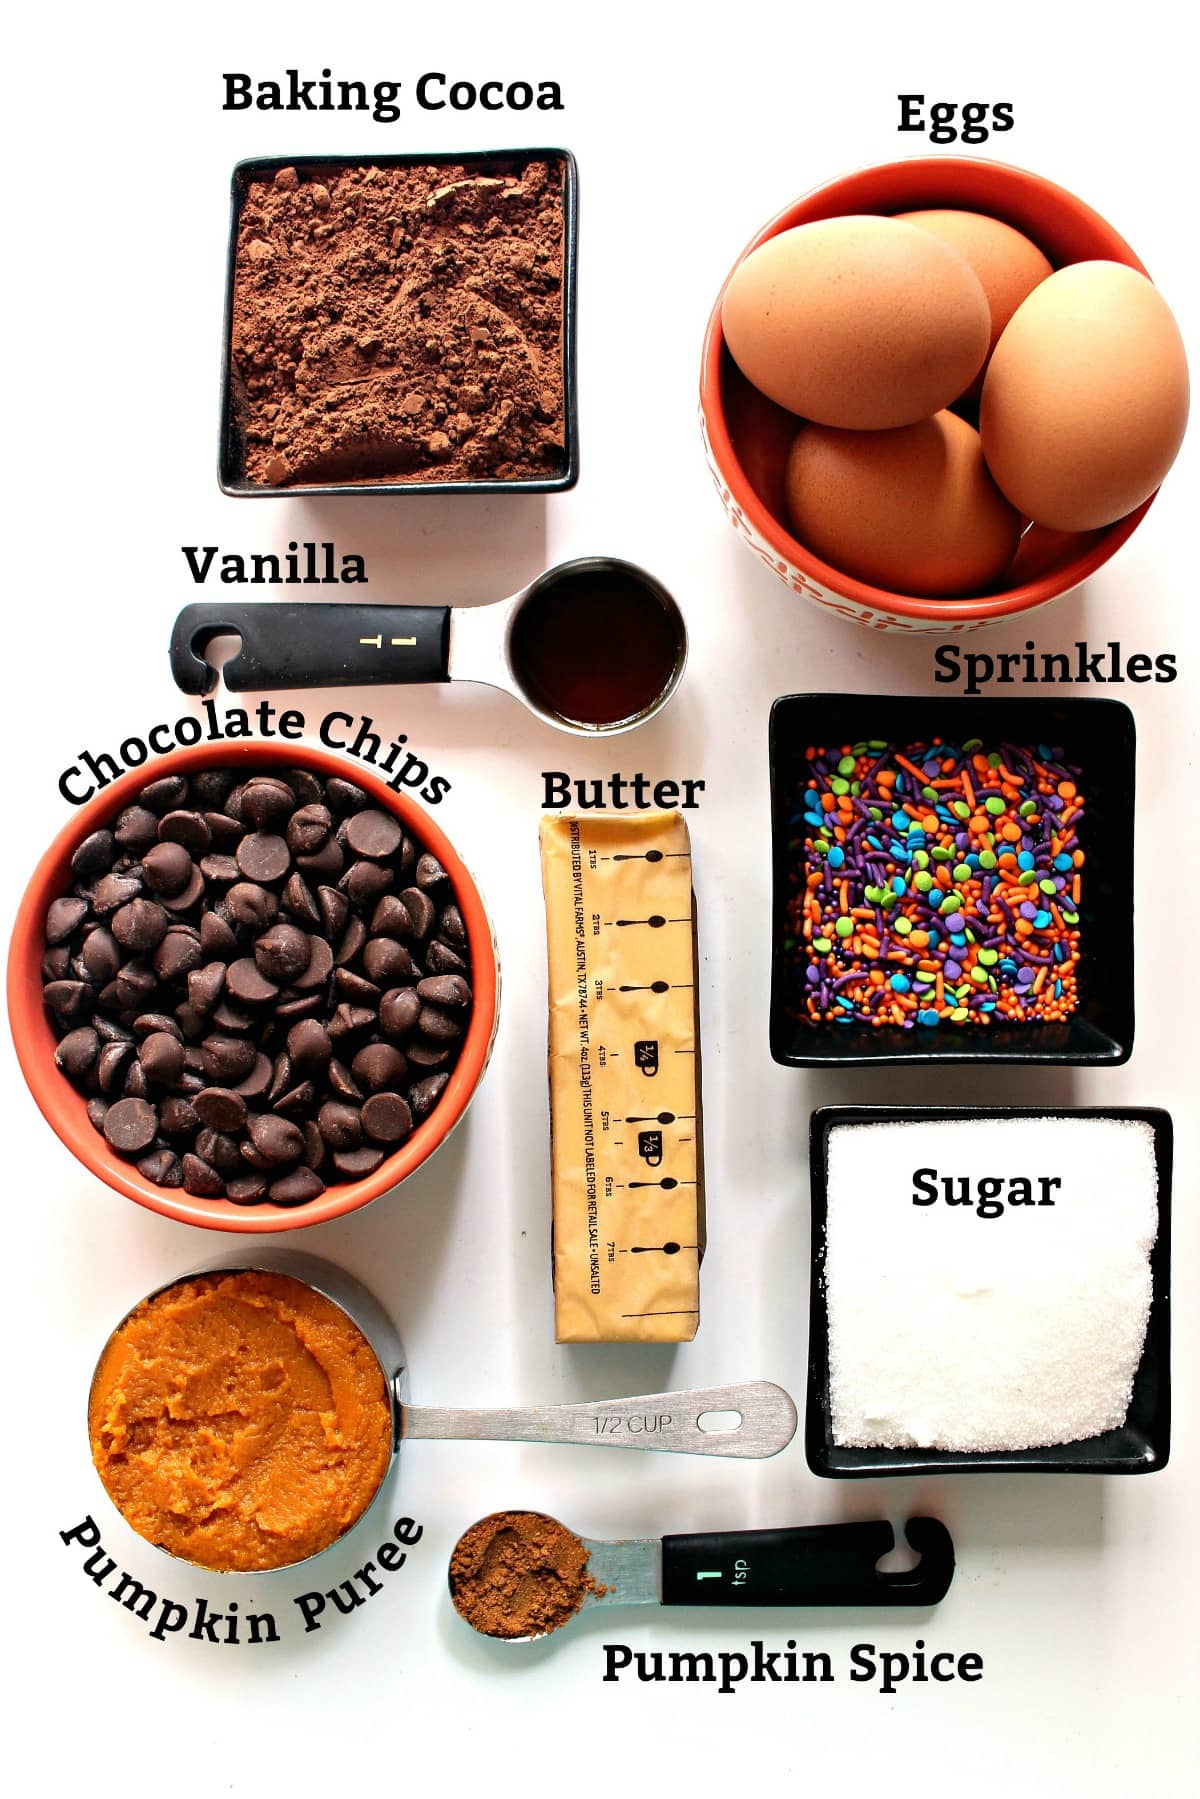 Labeled ingredients; cocoa, vanilla, eggs, chocolate chips, butter, sugar, pumpkin puree, pumpkin spice, sprinkles.